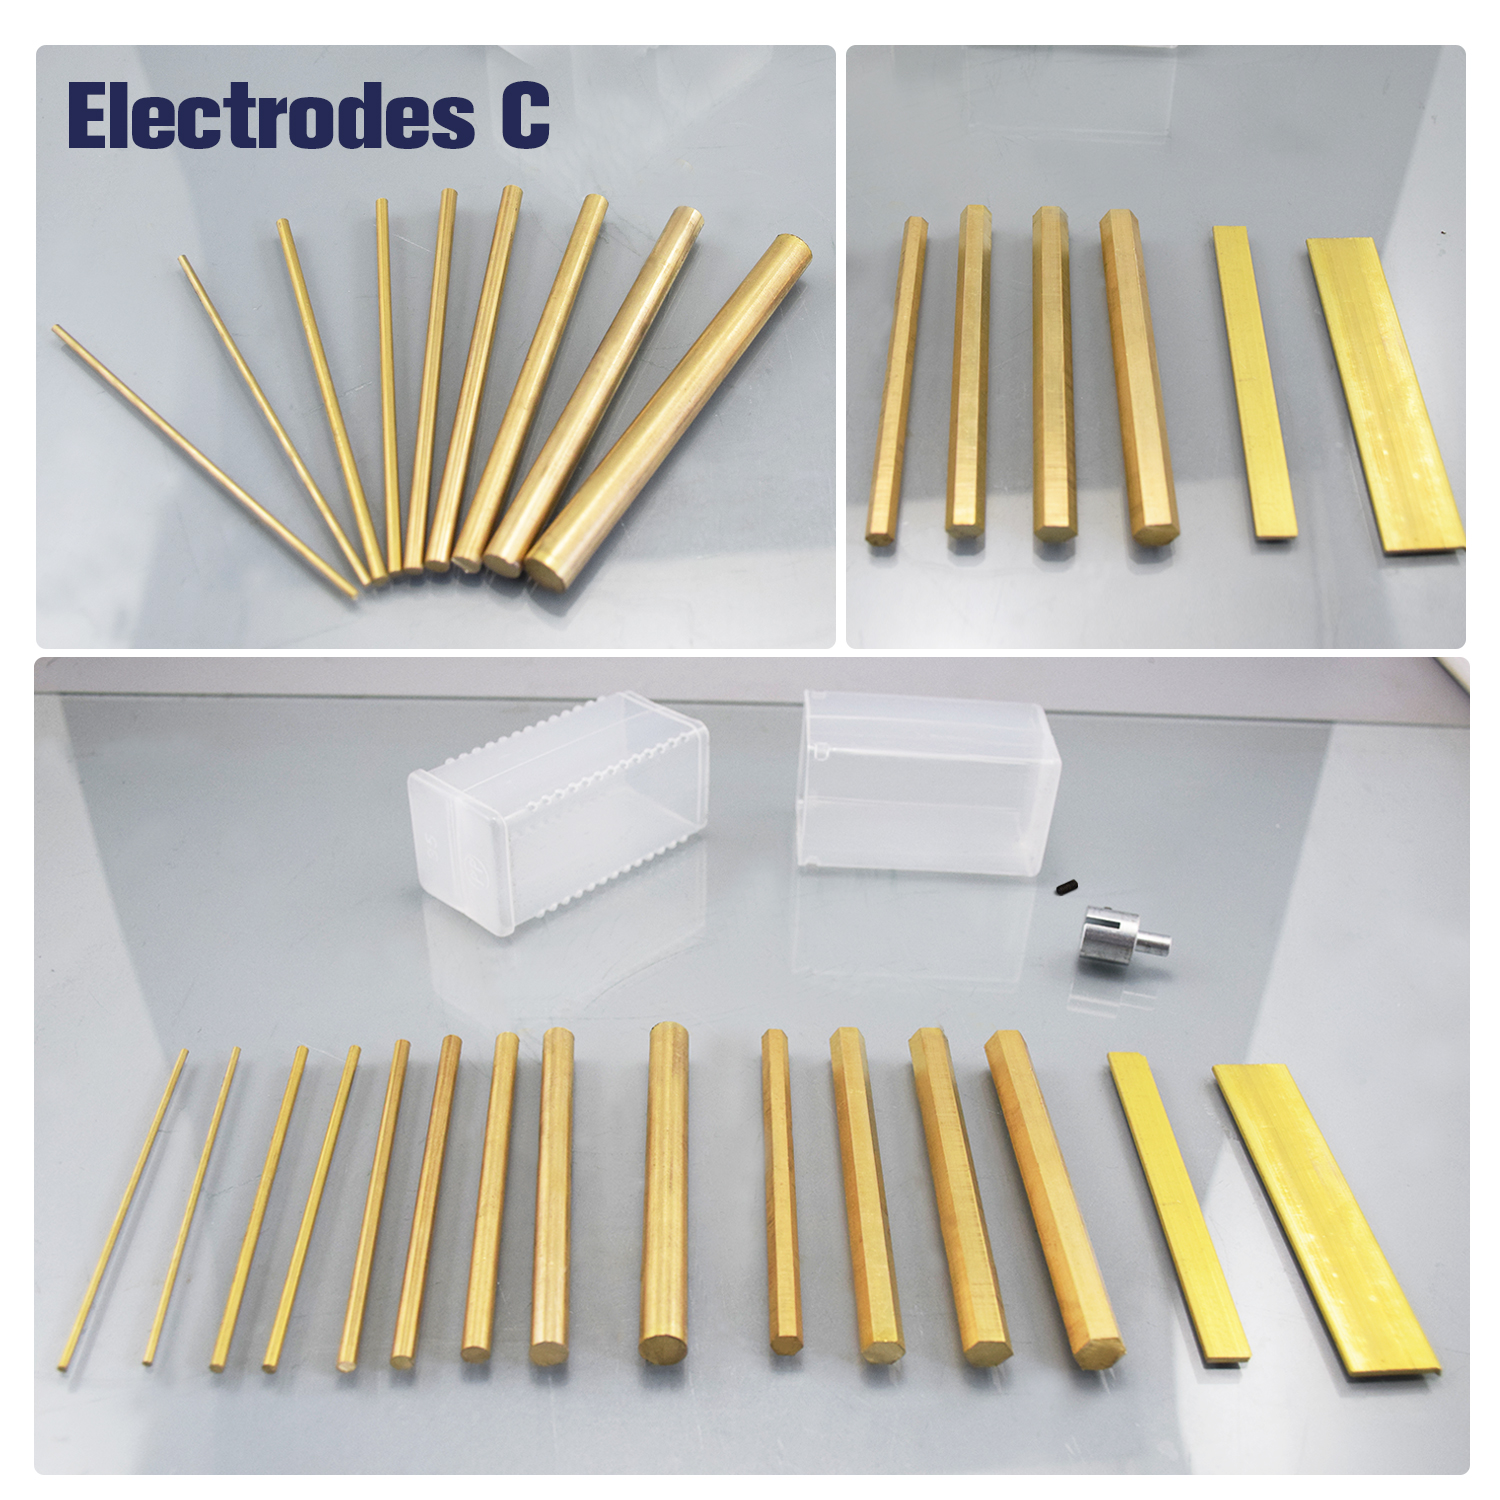 Selection of Electrode Material and Working Fluid (Dielectric)